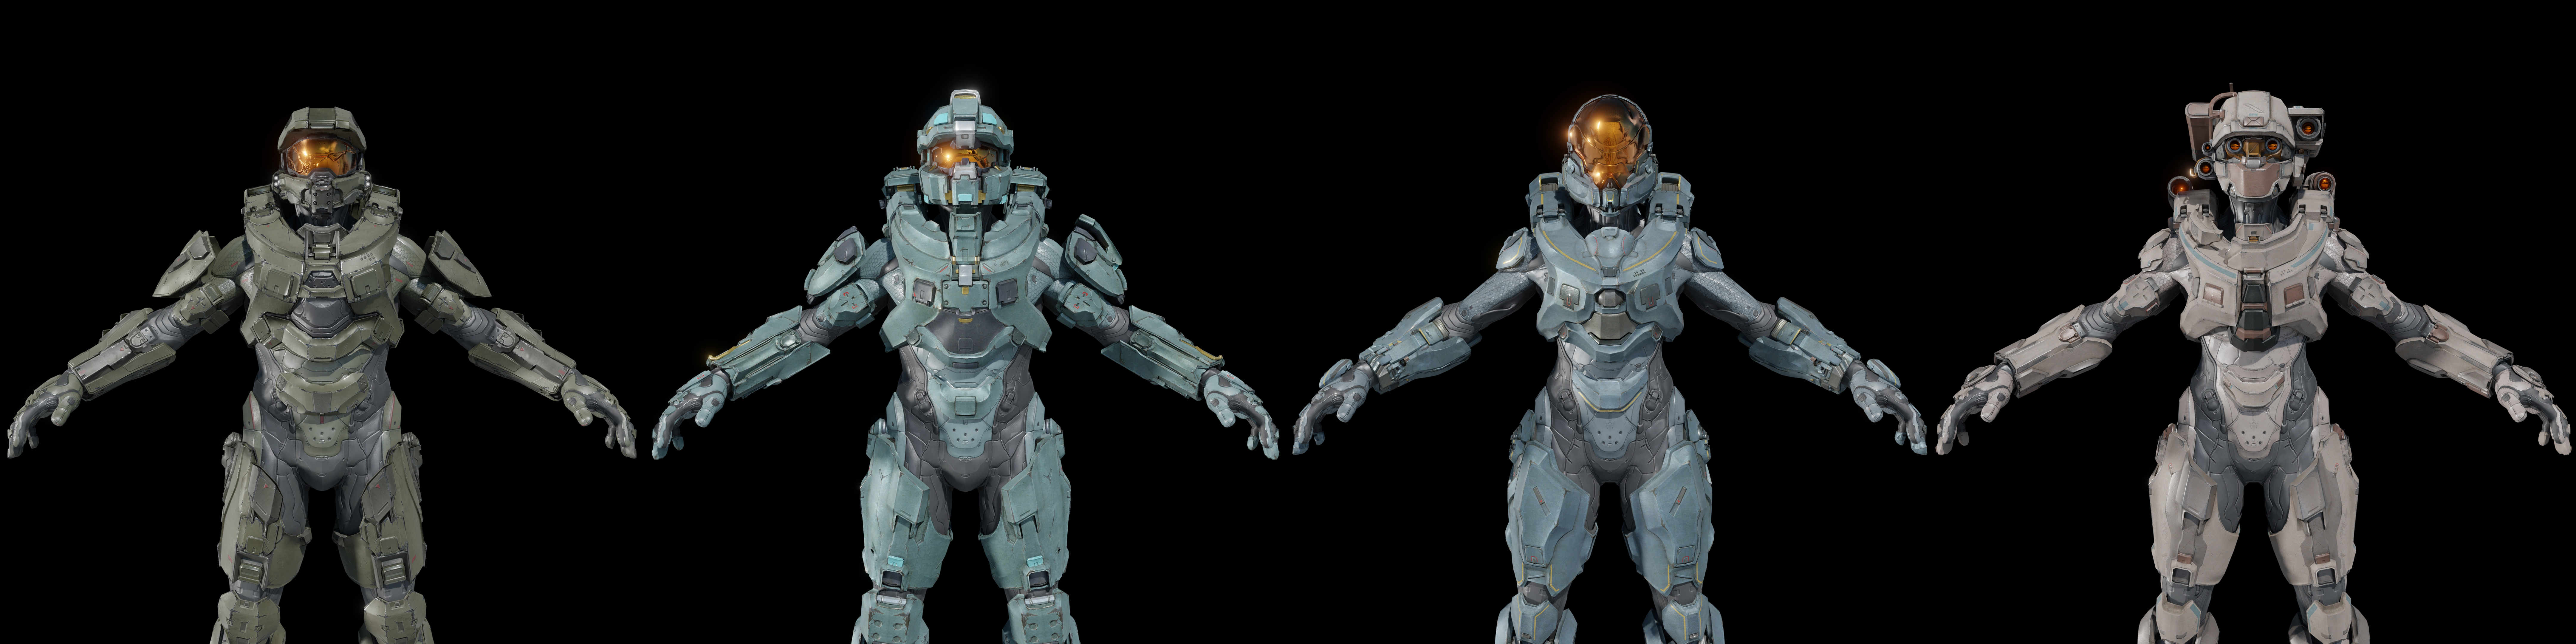 Halo 5 Multiplayer Chief Armour (3) by masterj2001 on DeviantArt